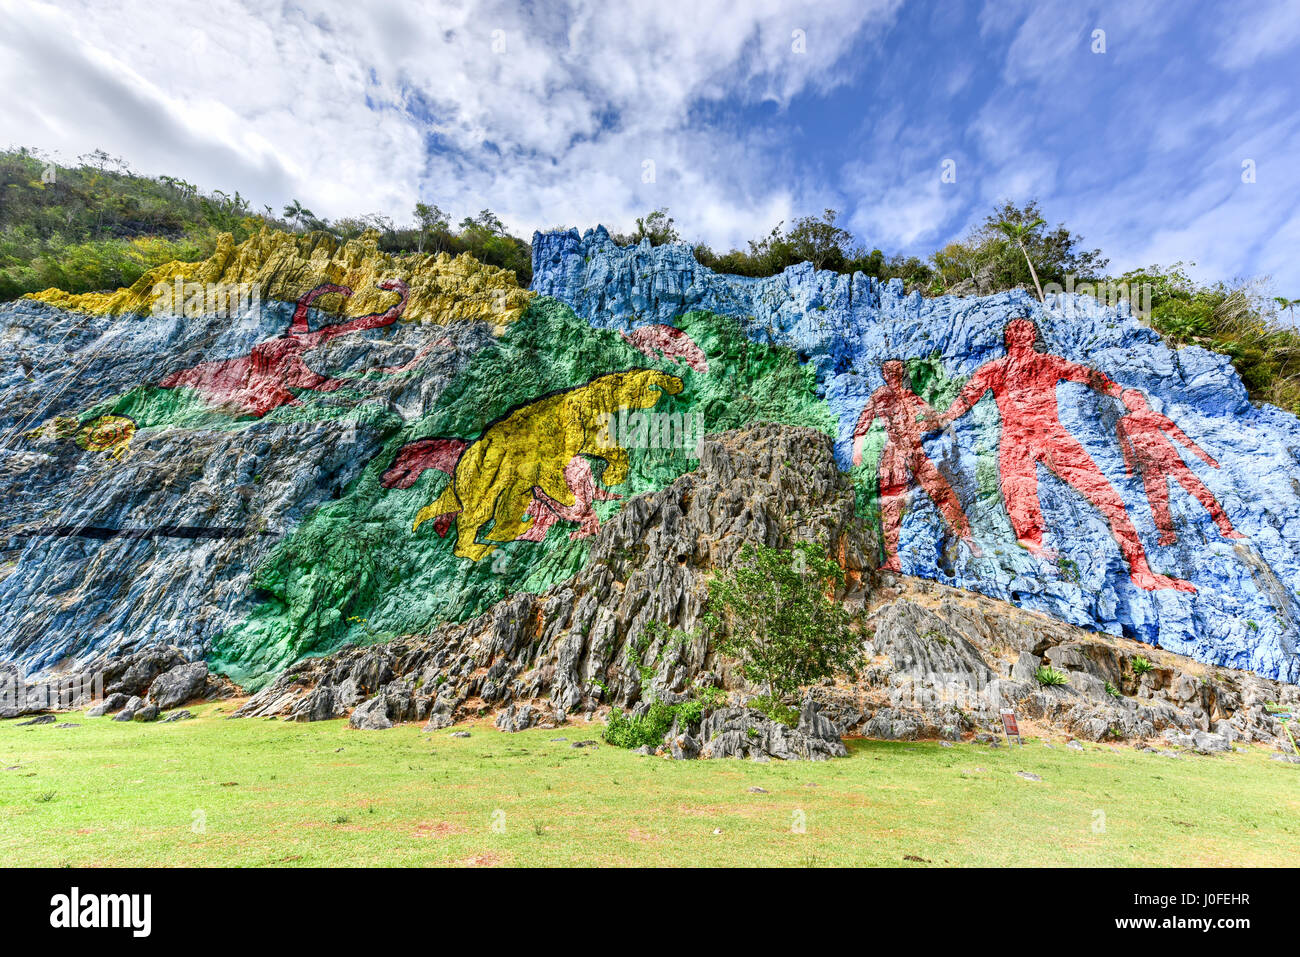 Mural de la Prehistoria, a giant mural painted on a cliff face in the Vinales area of Cuba. It is 120m long and took 18 people 4 years to complete. Stock Photo